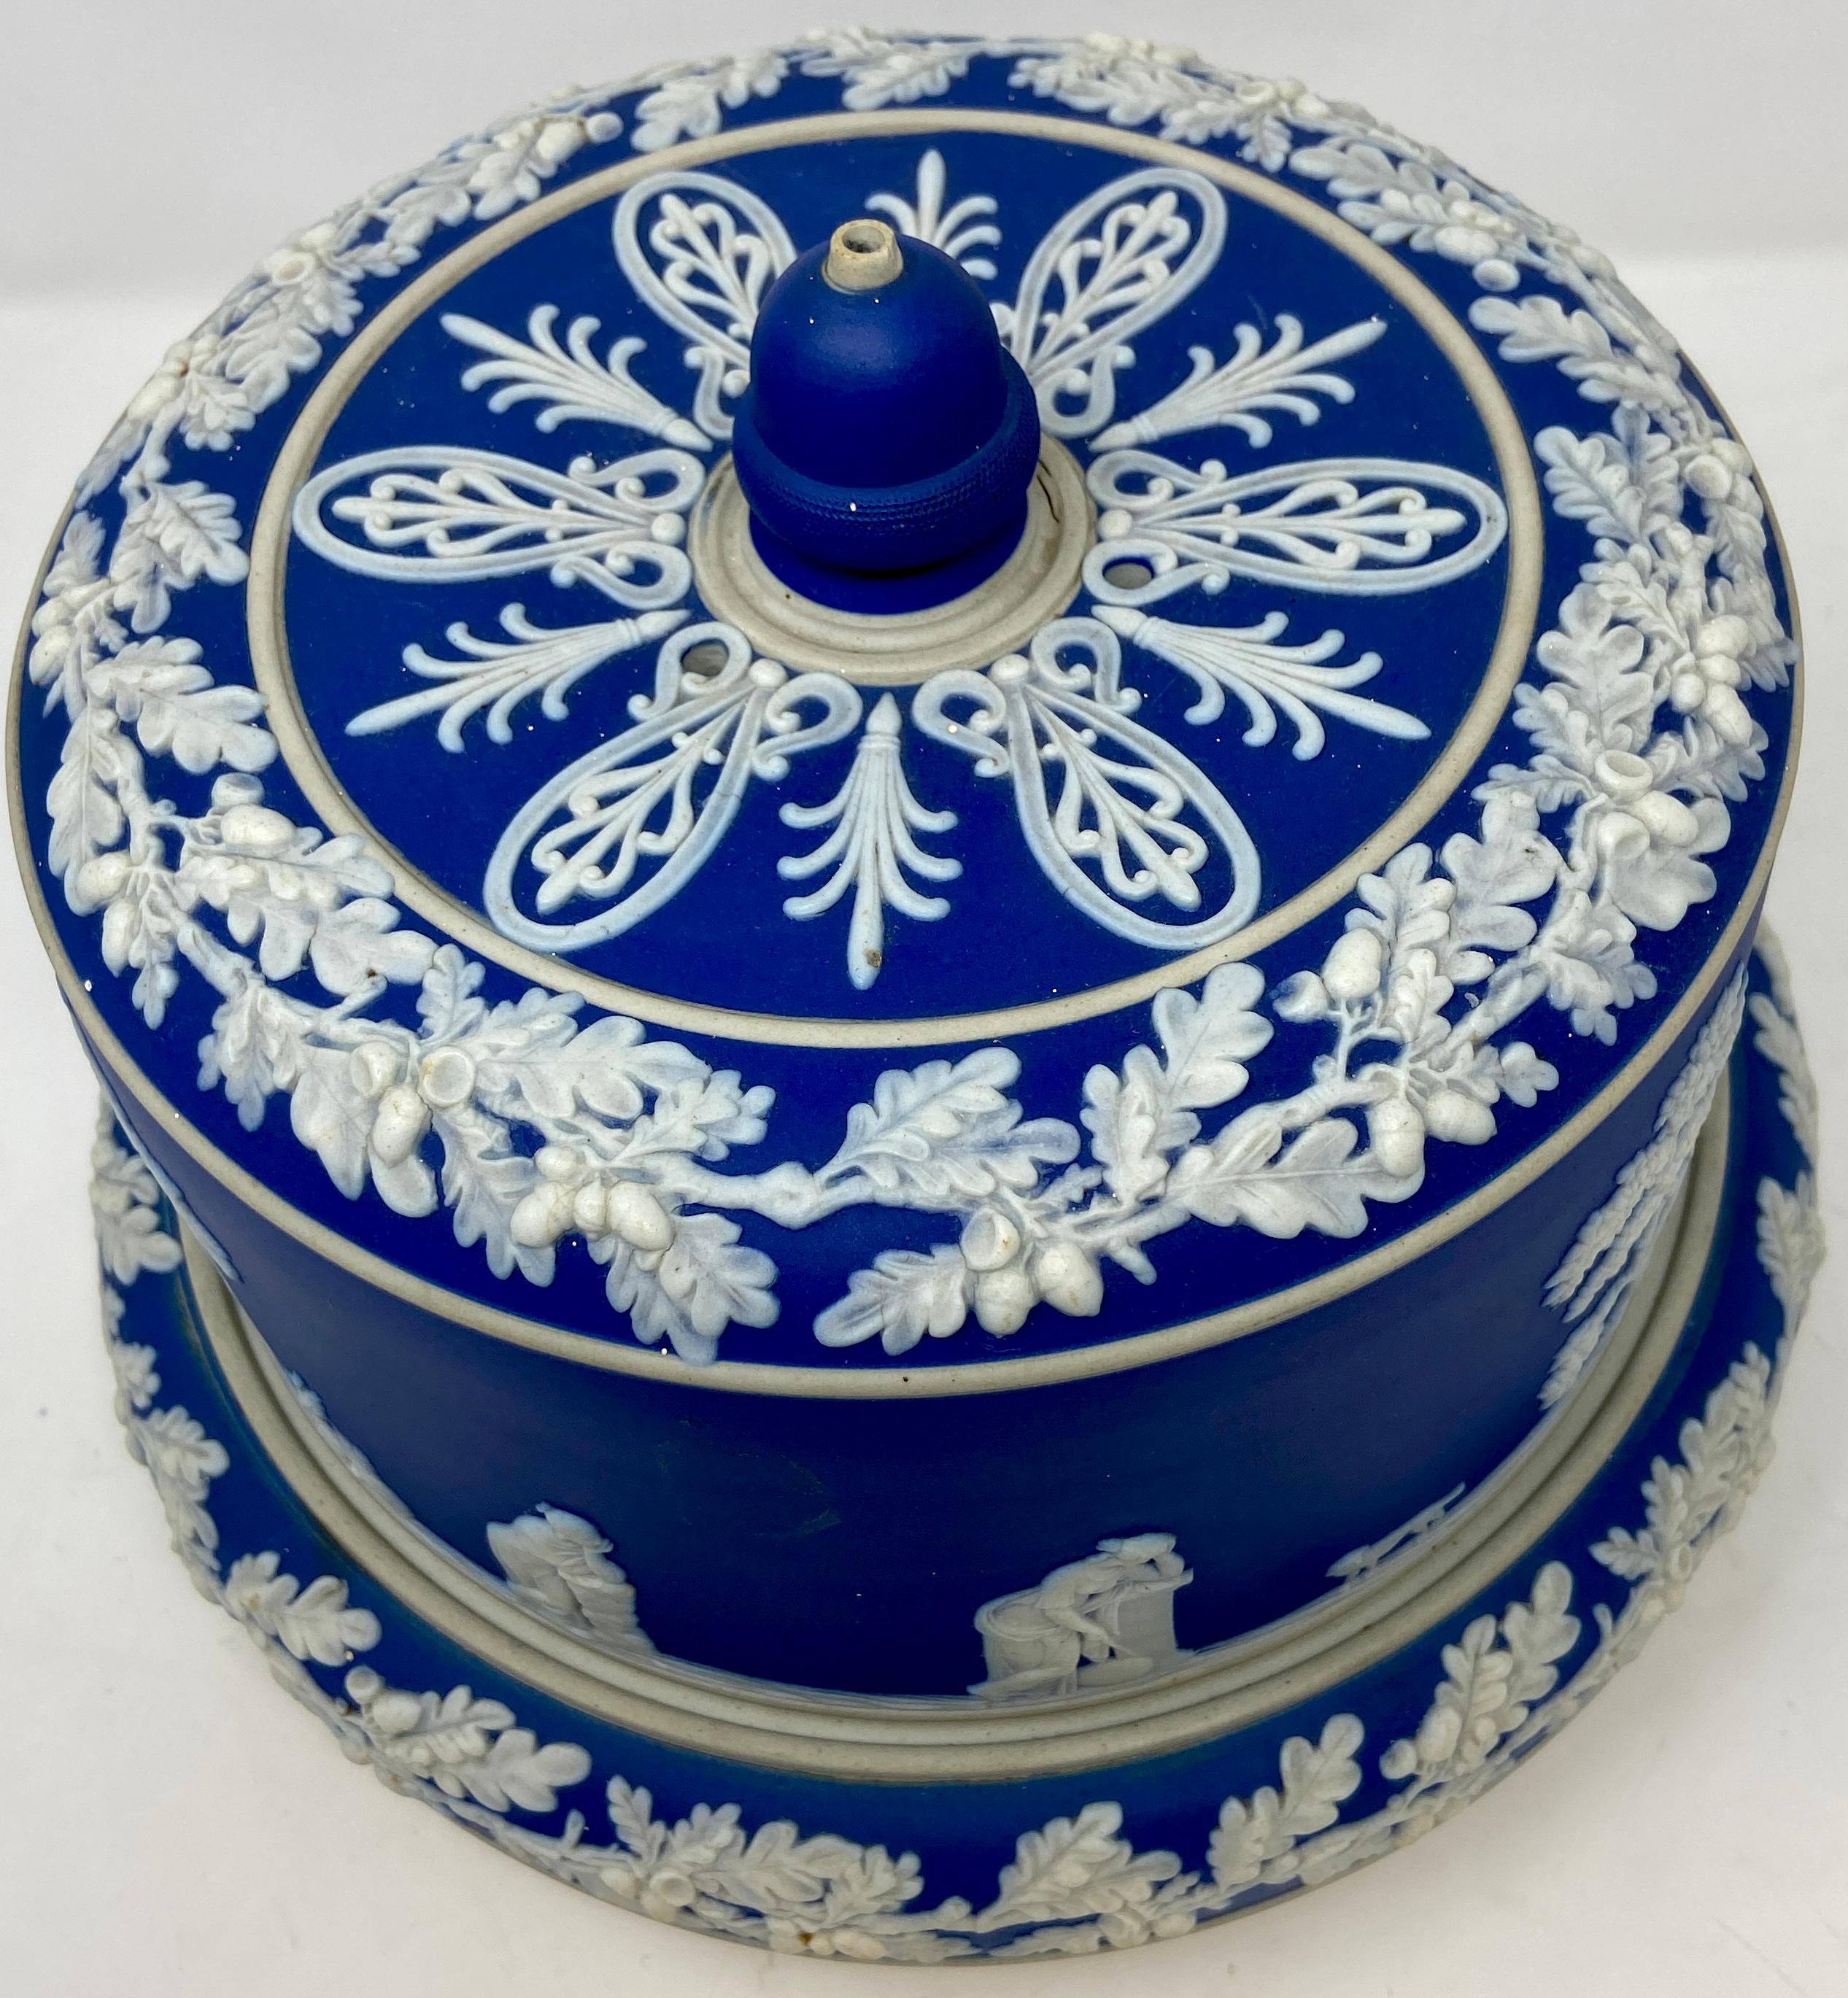 Antique English Porcelain covered cheese or cake dish, Circa 1910-1915.